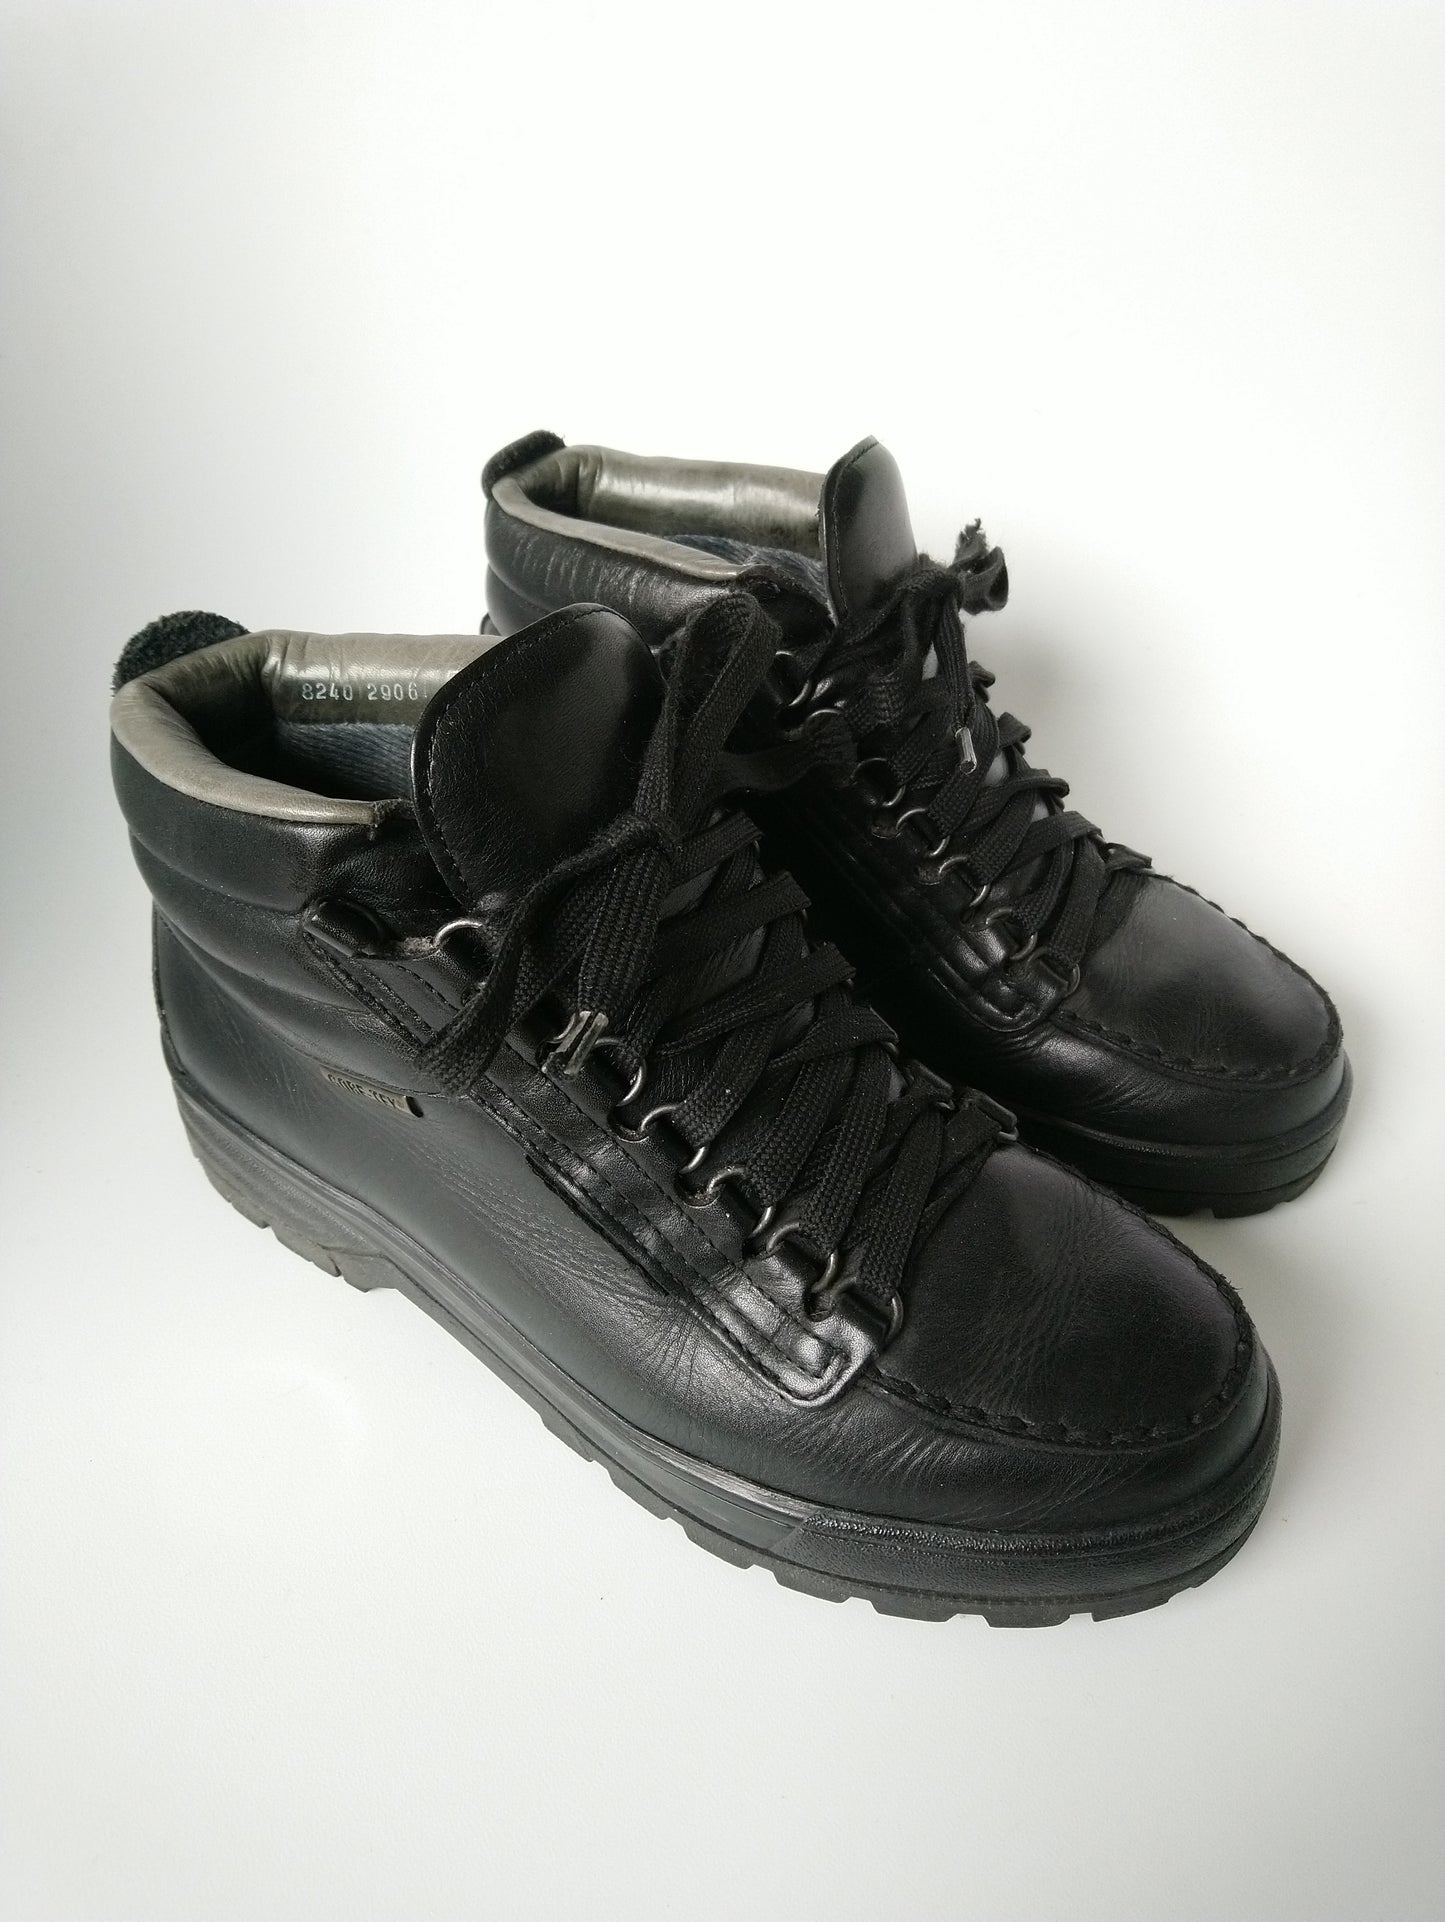 Mephisto Trampoline Leather Lace -up boots. Black colored. Size 40.